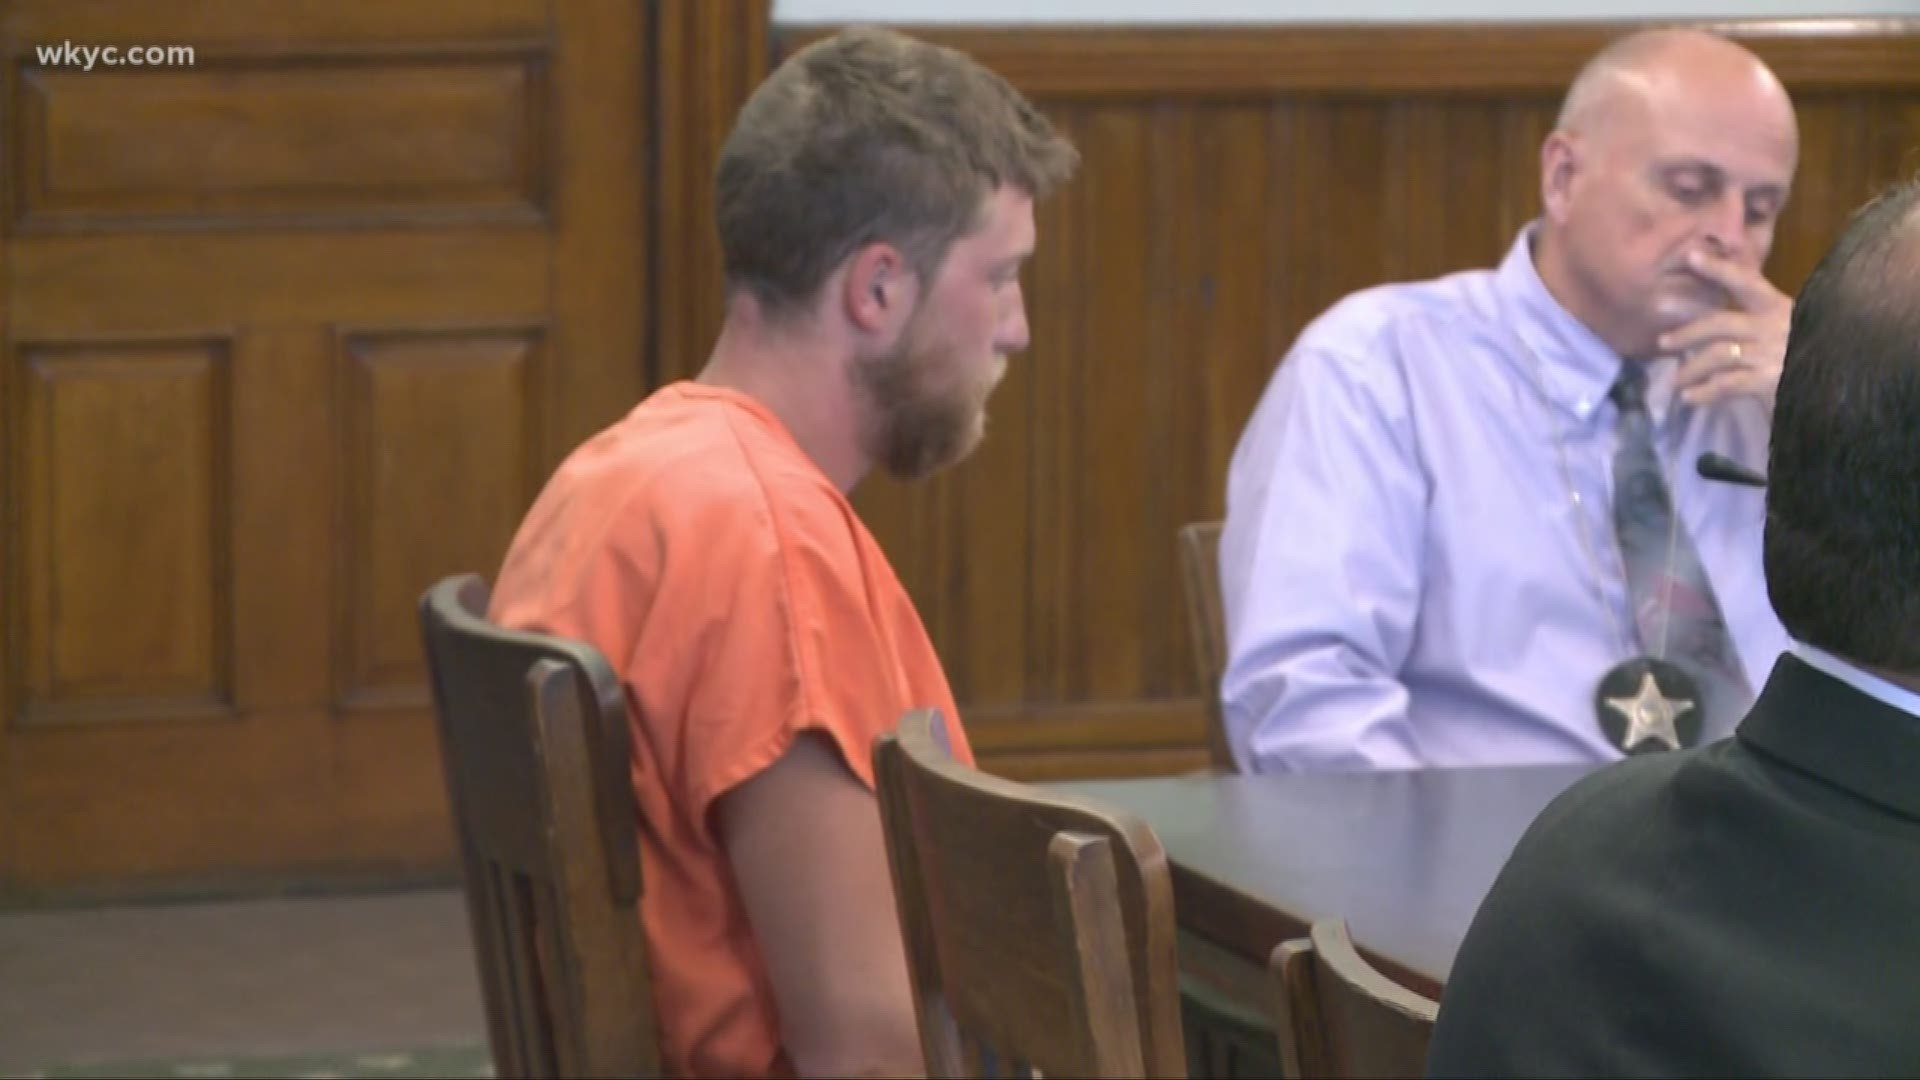 Matthew Little appeared in court on Thursday. The 30-year-old faces 15 charges, including three counts of involuntary manslaughter, in the death of 14-year-old Jonathan Minard.